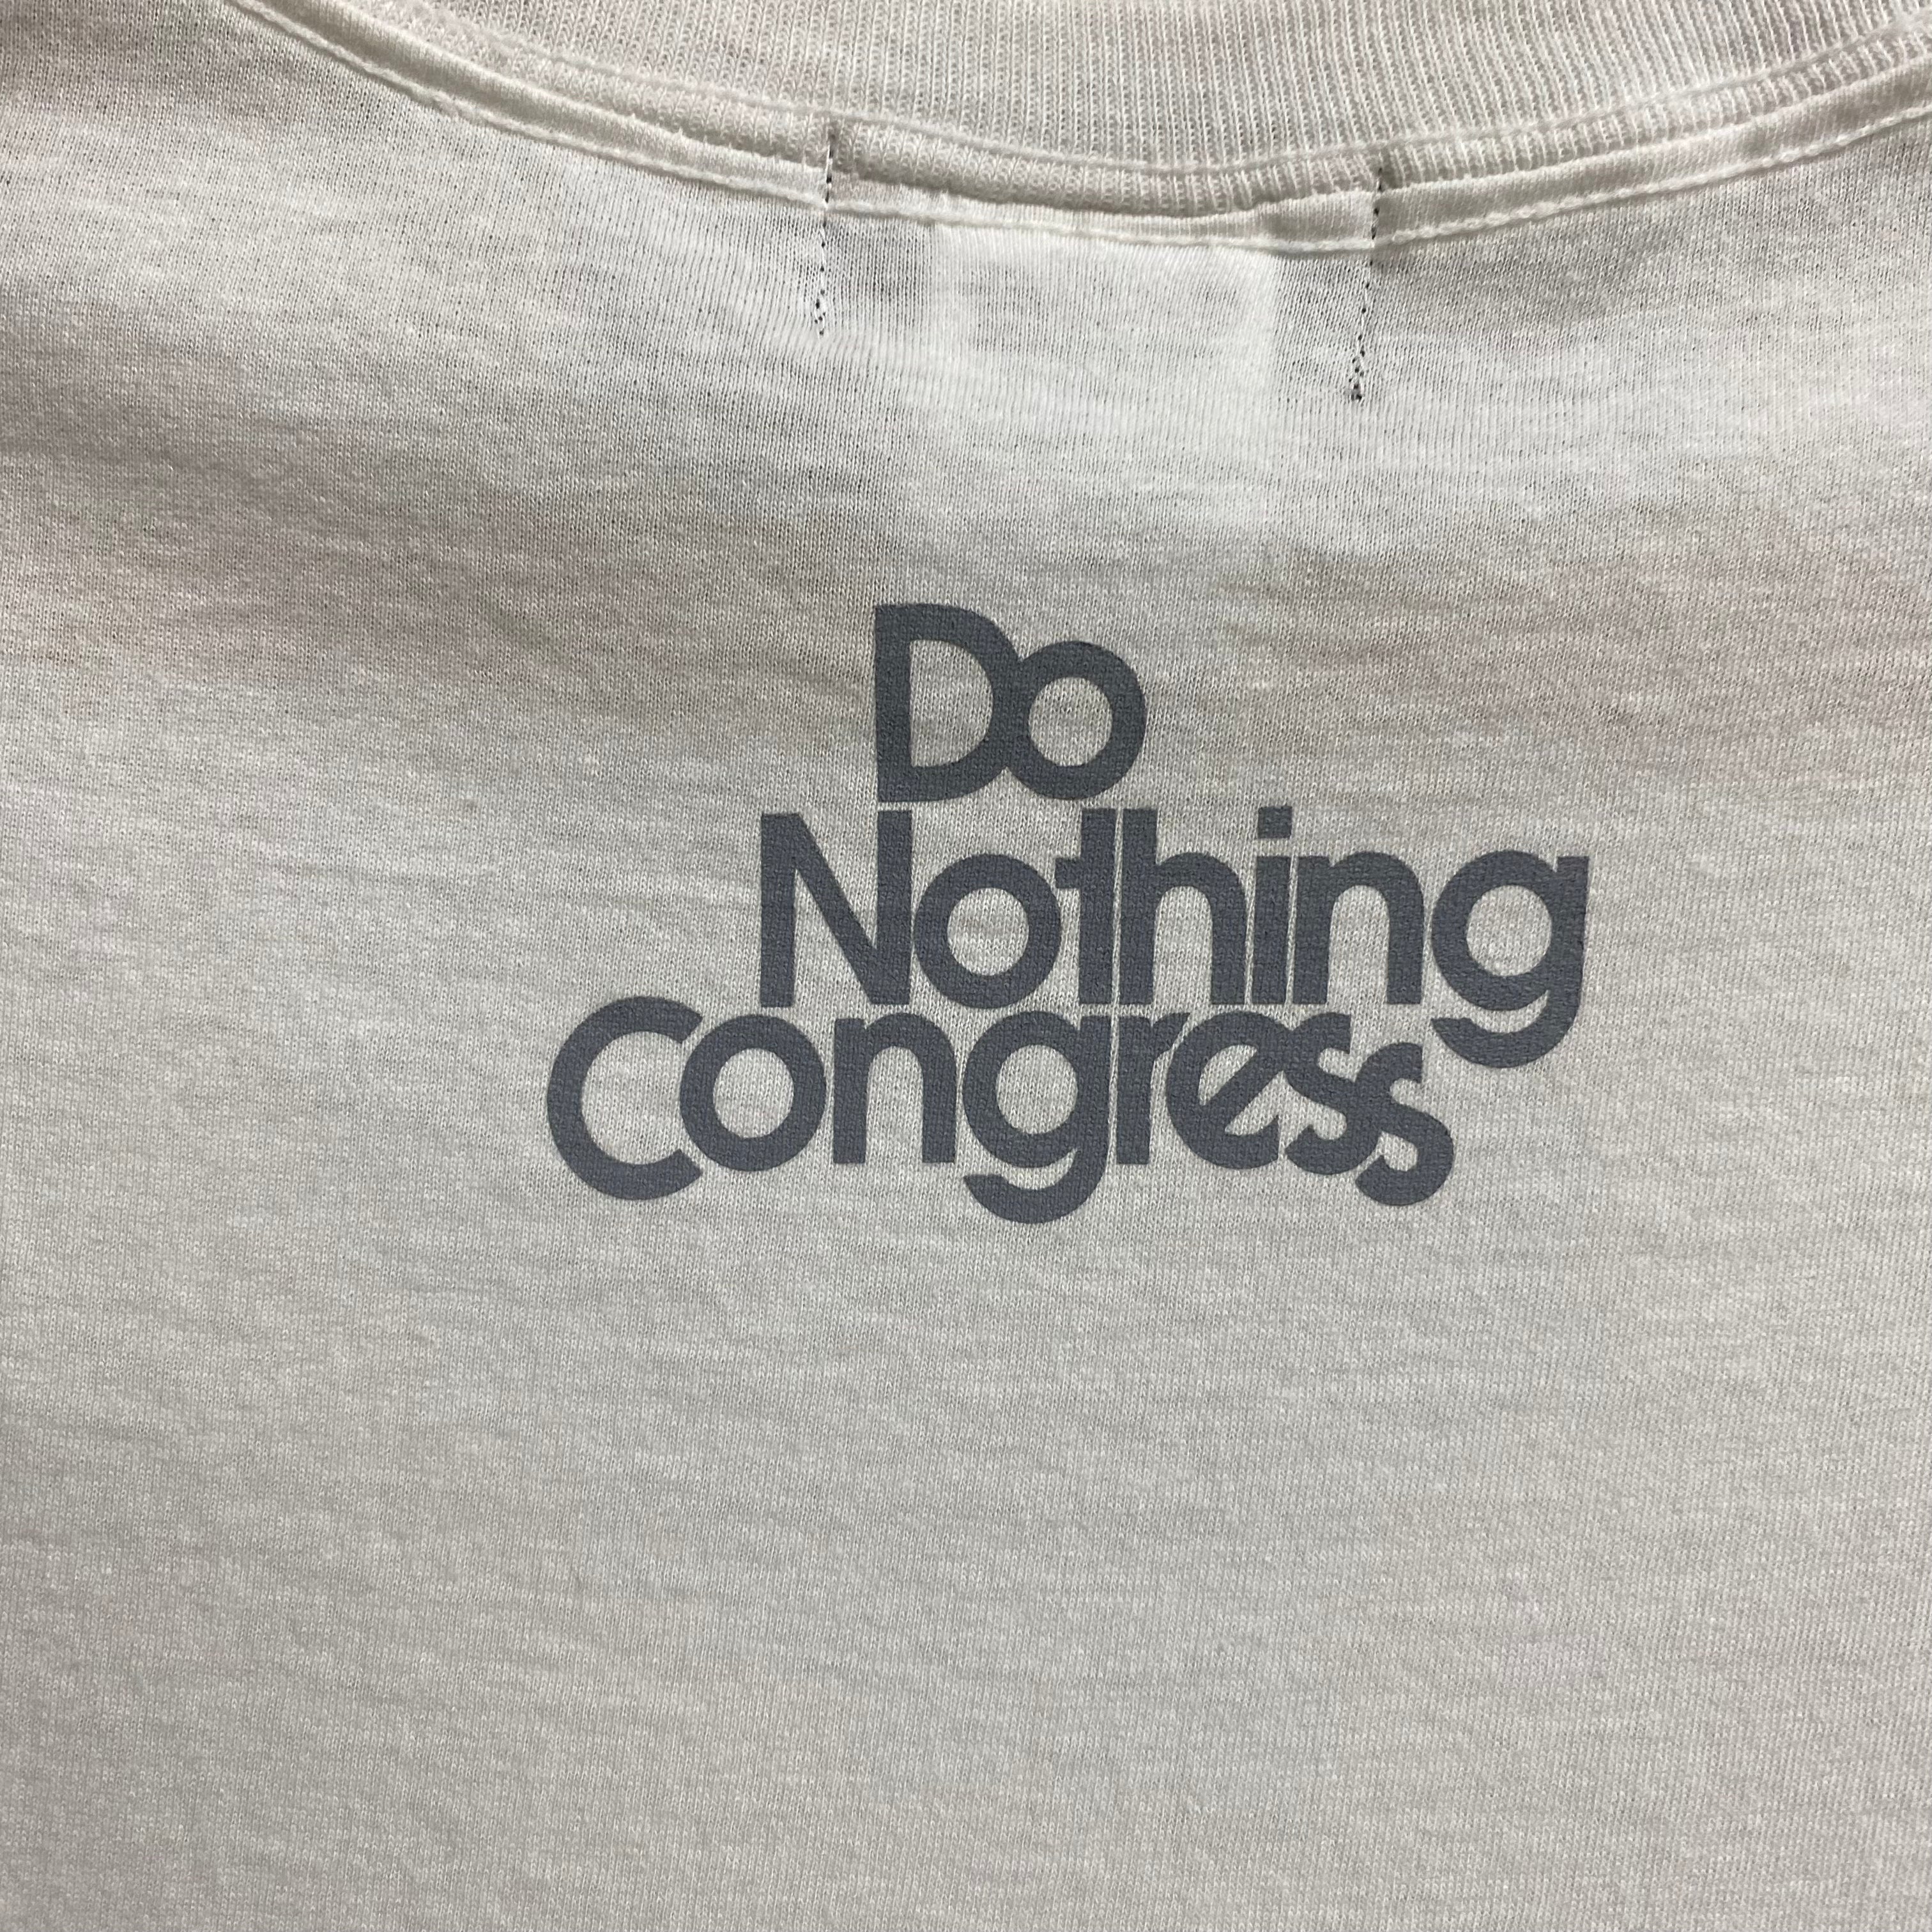 Do Nothing Congress "A Cup of Tea" T-SHIRTS / Do Nothing Congress